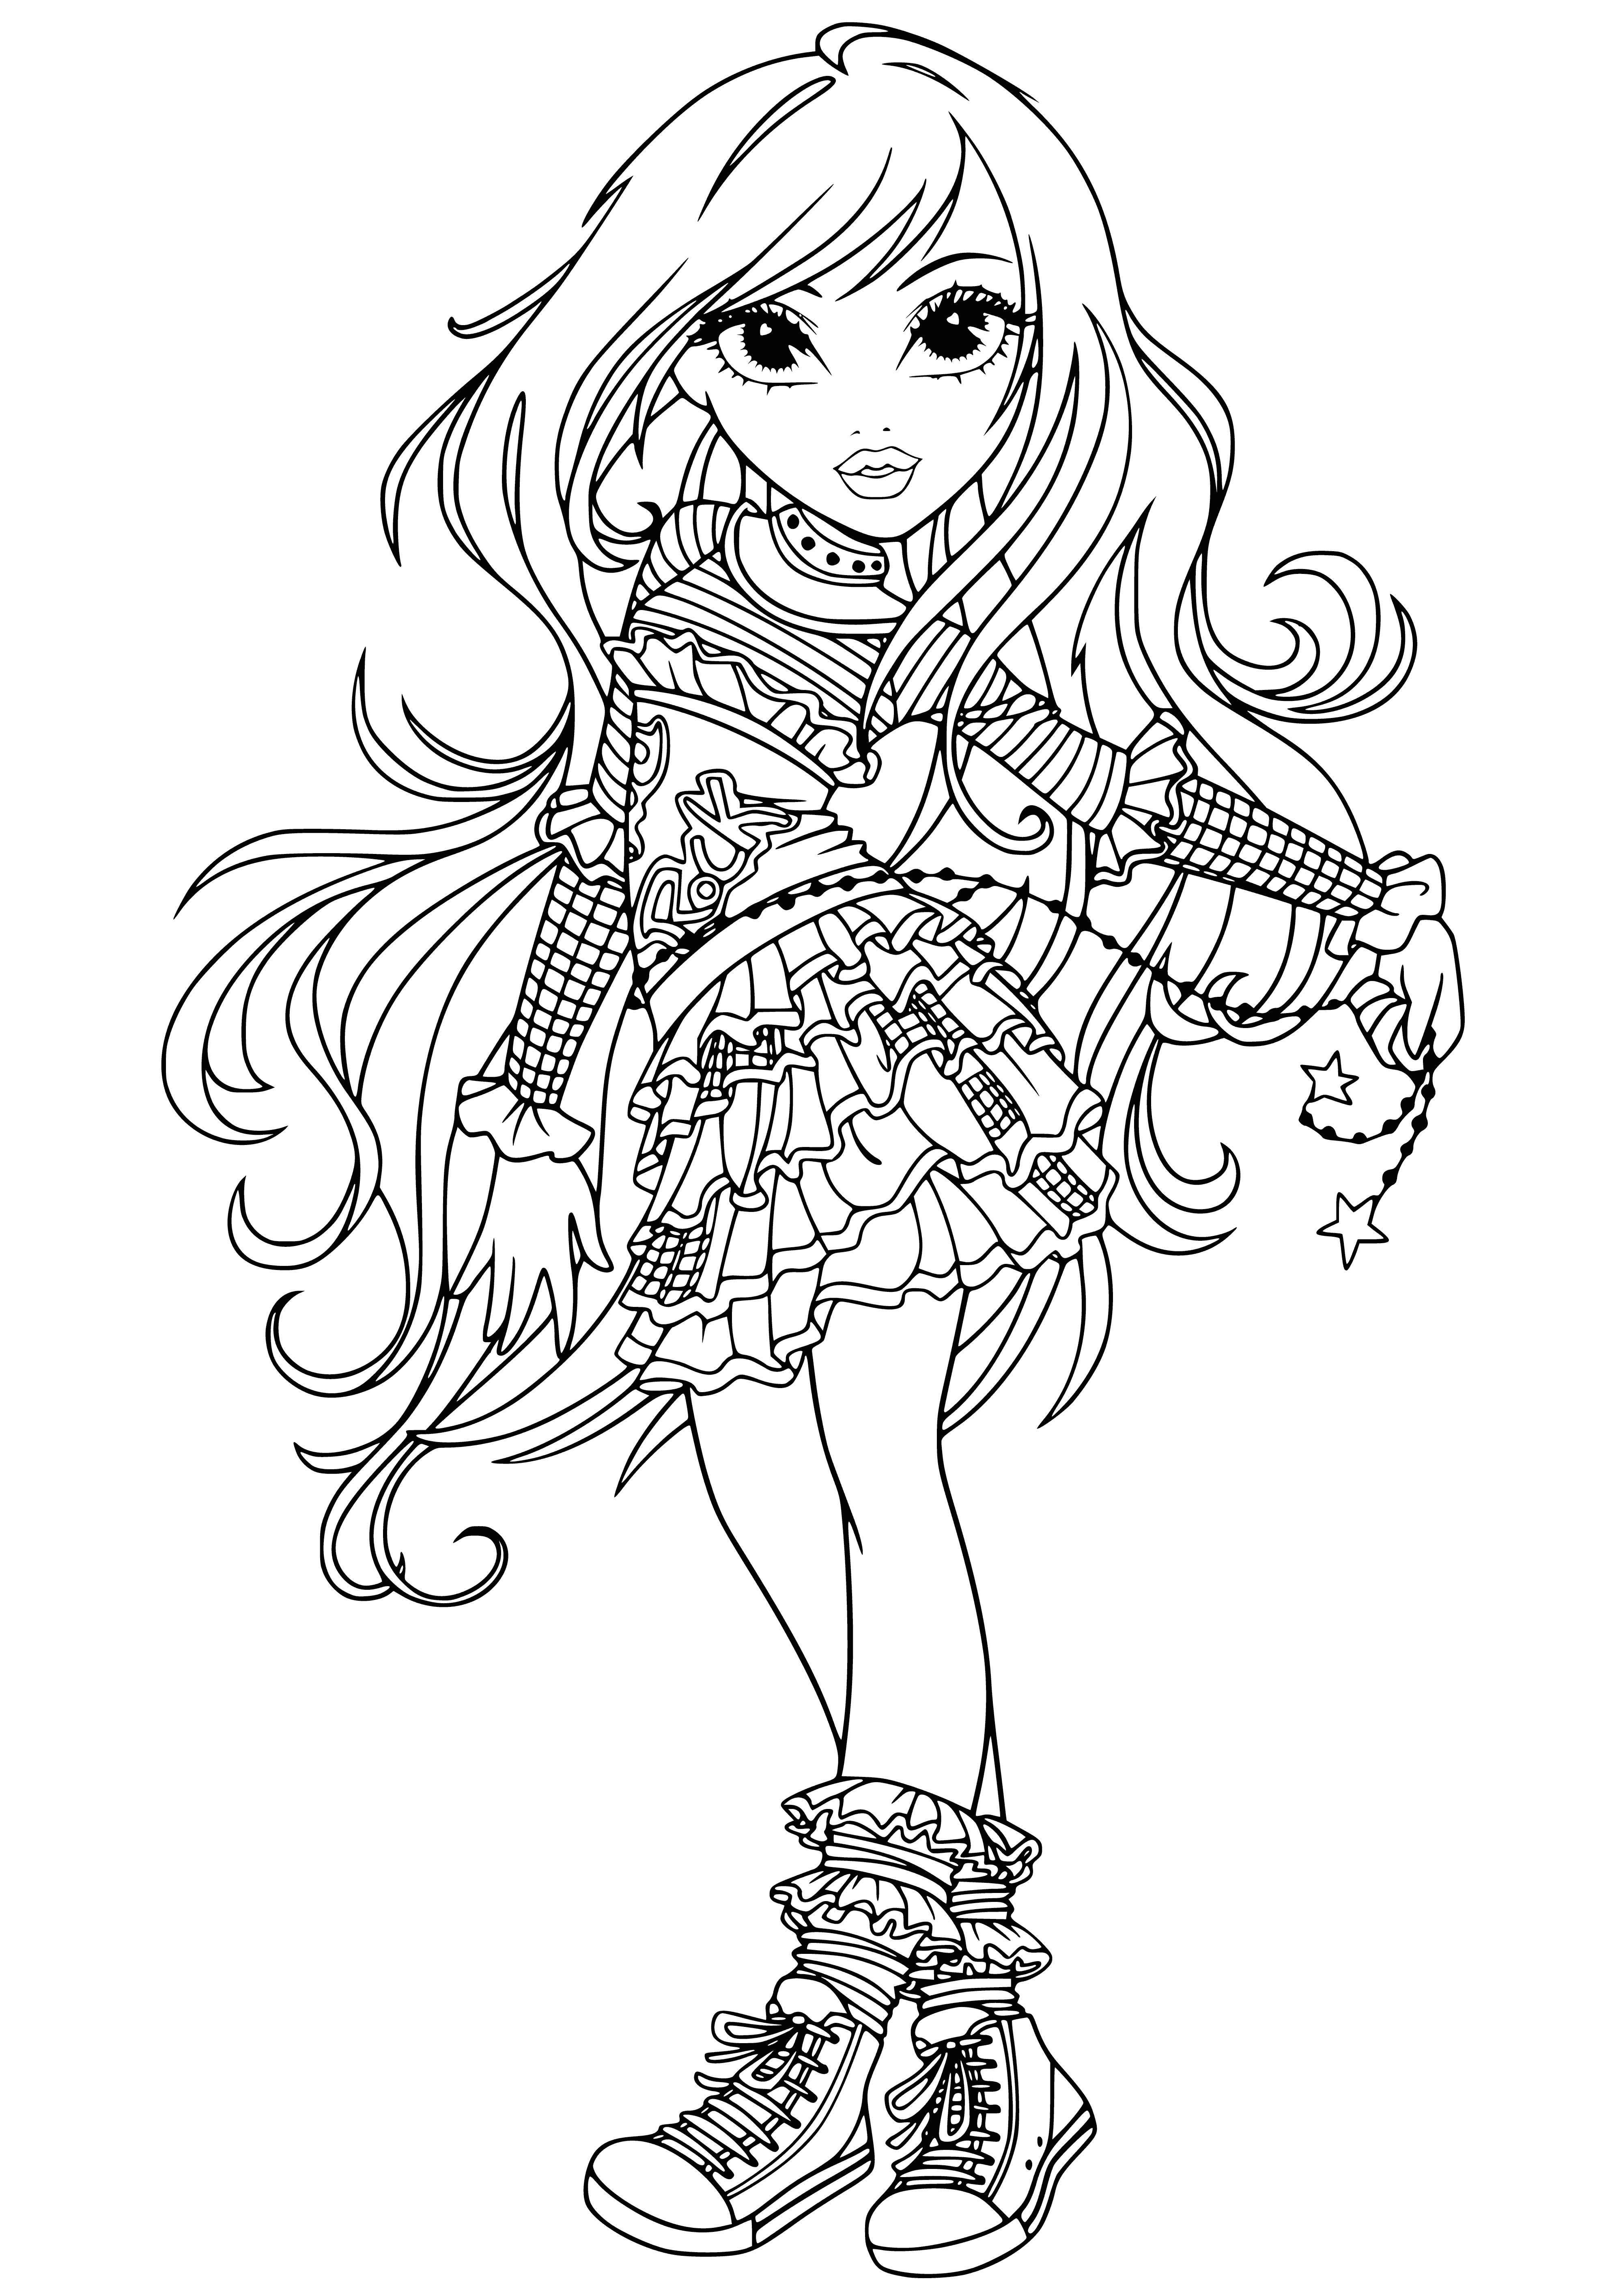 coloring page: She's got dark hair, brown eyes, all in white 'cept blue skirt and scarf.